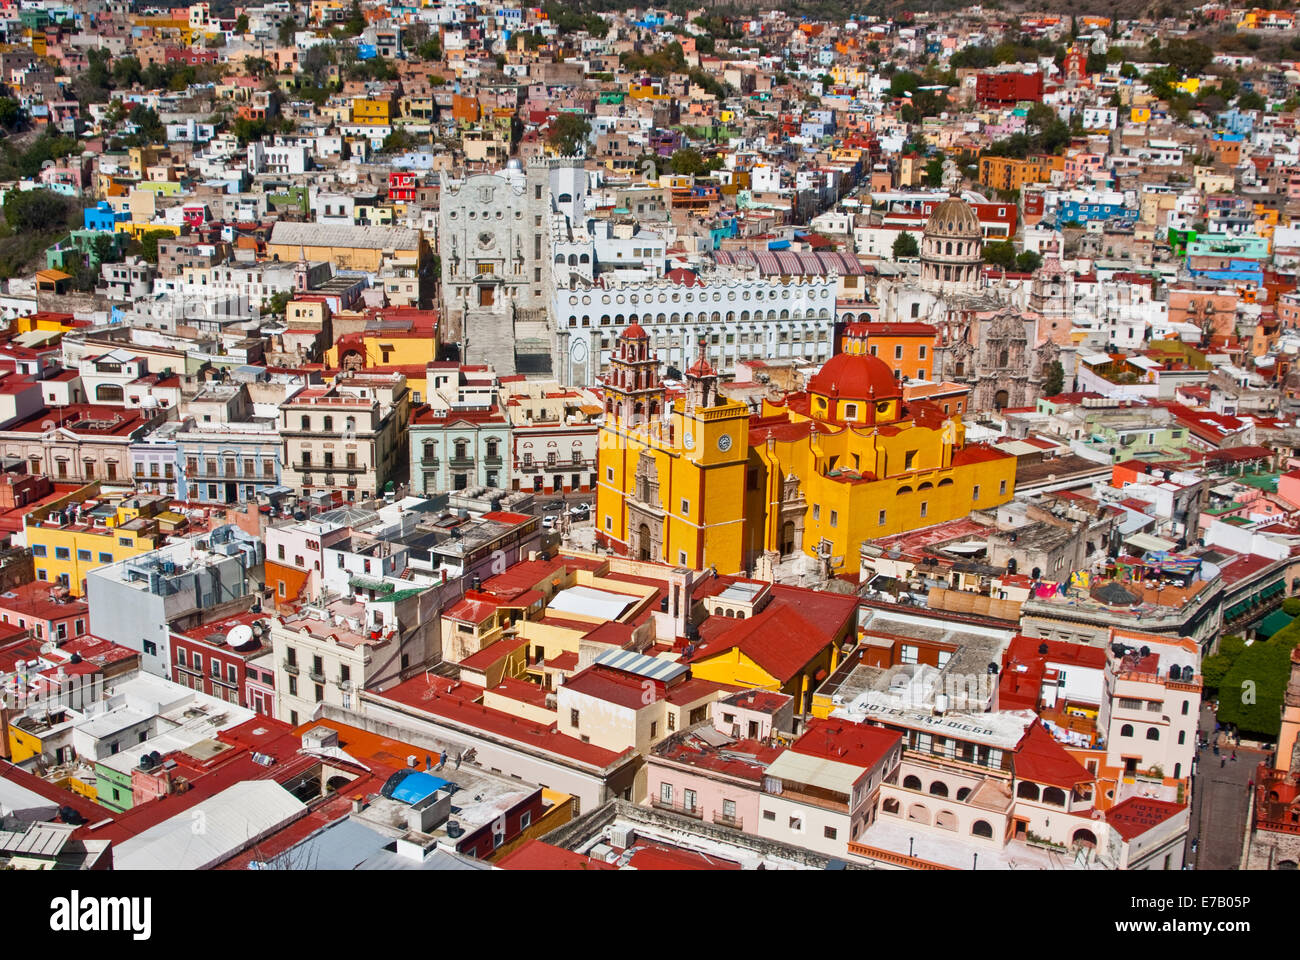 GUANAJUATO, MEXICO – Guanajuato World Heritage Site, historic city view of 16th century buildings and houses of vibrant color Stock Photo